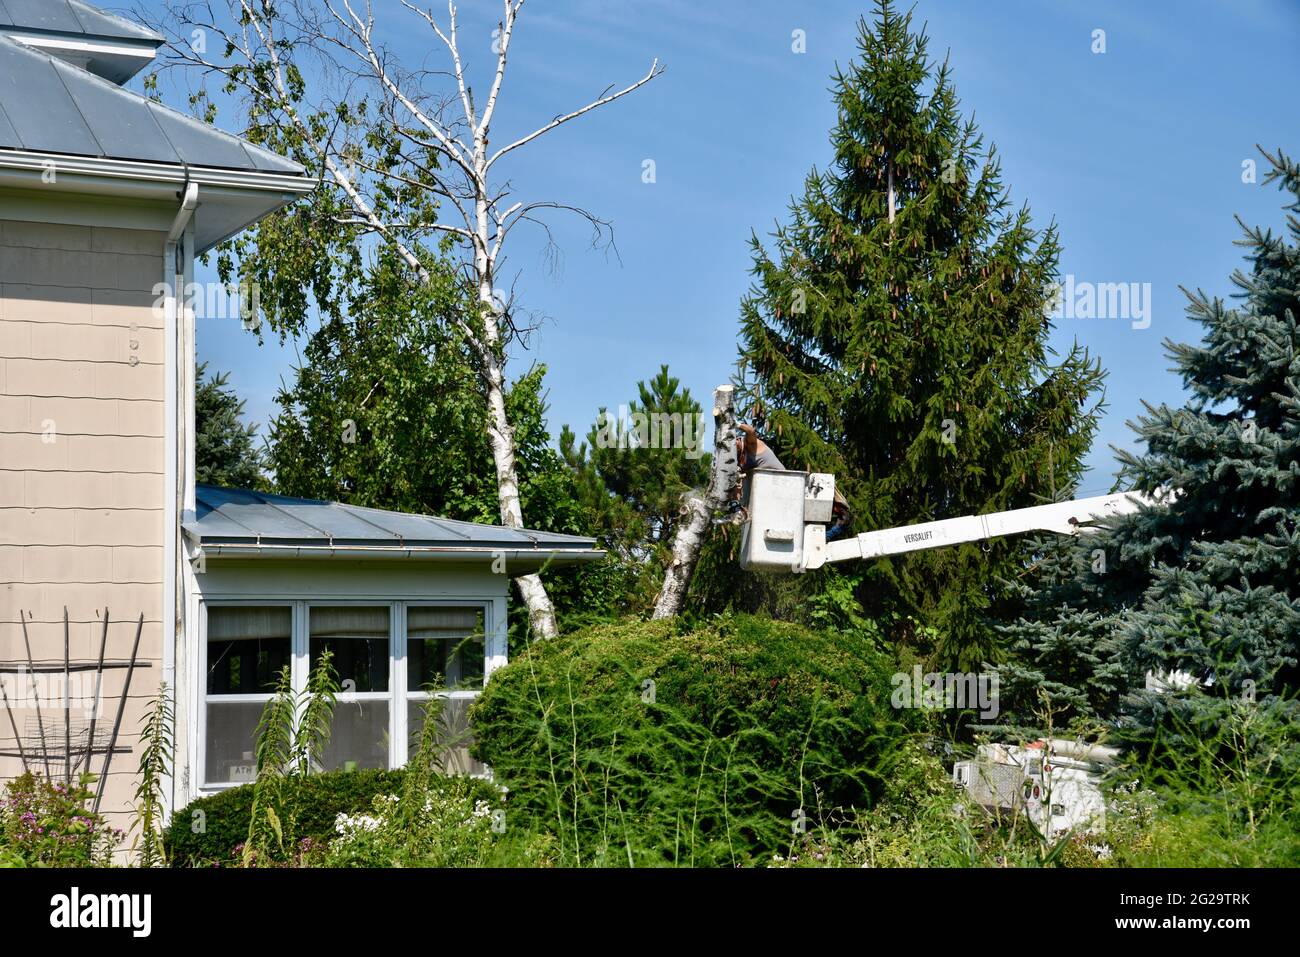 Professional tree trimmer removing dead or damaged birch tree using chainsaw on elevated hydraulic lift to gain height advantage, Browntown WI, USA Stock Photo